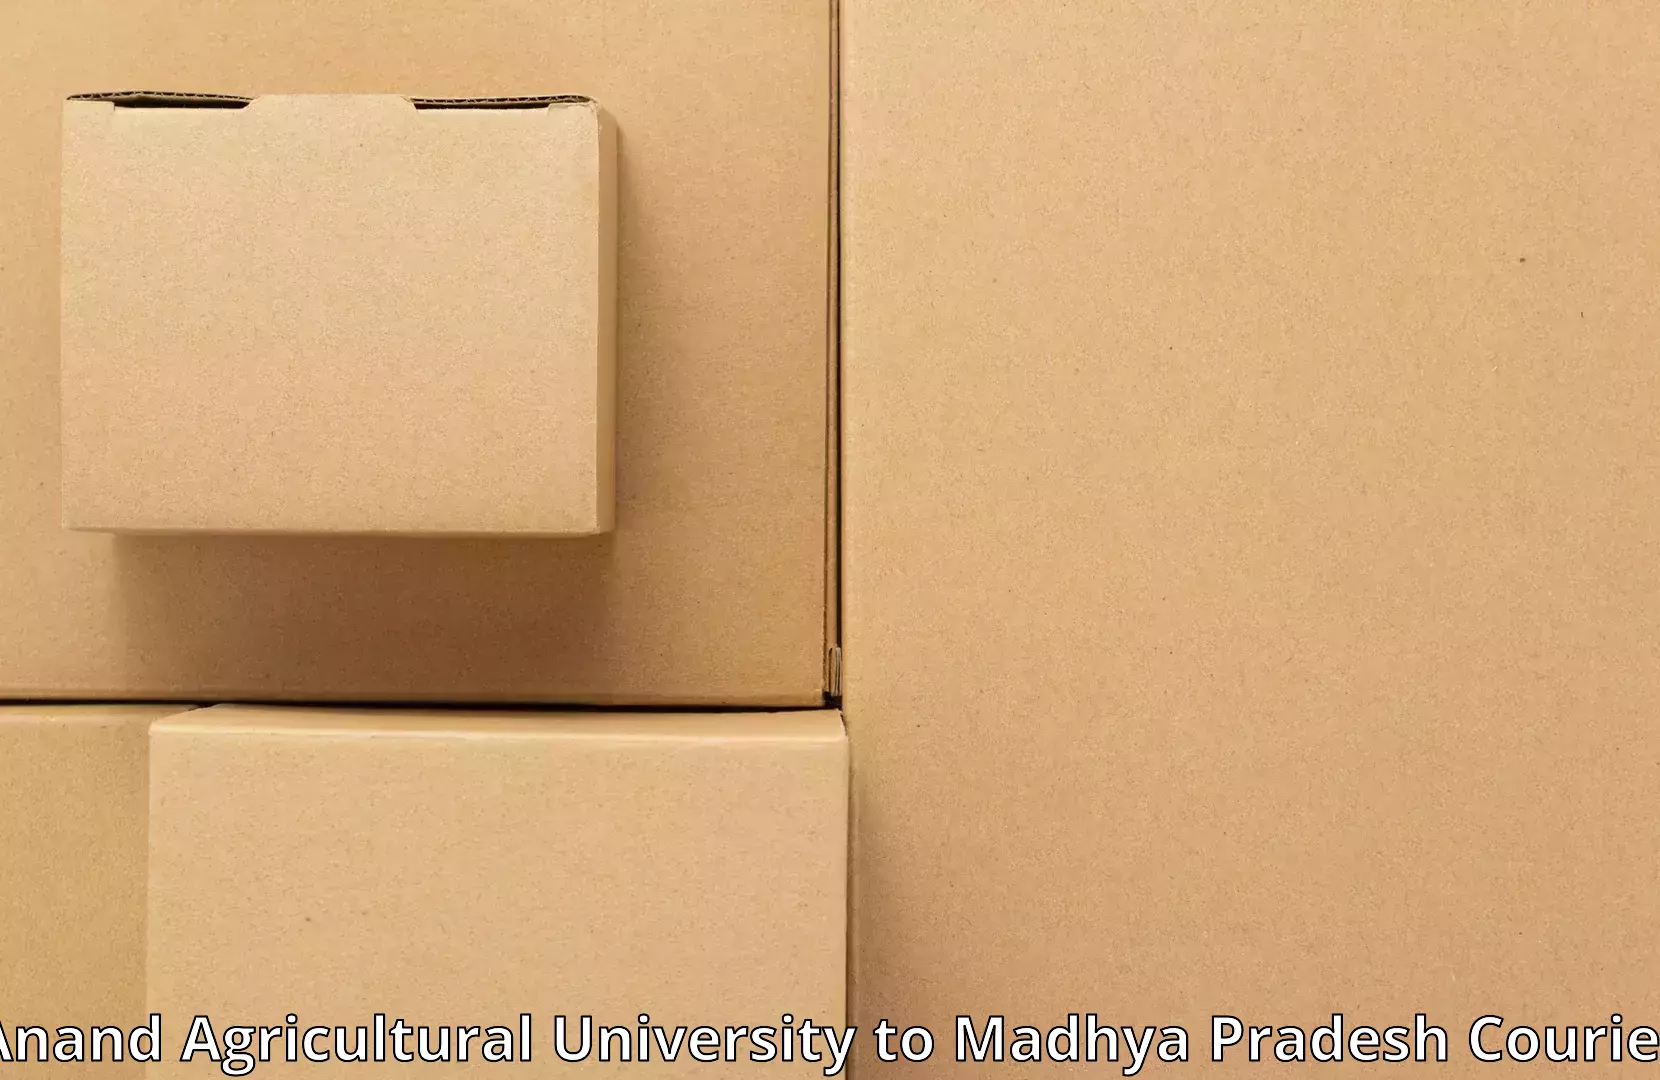 Quality moving company Anand Agricultural University to Mandideep